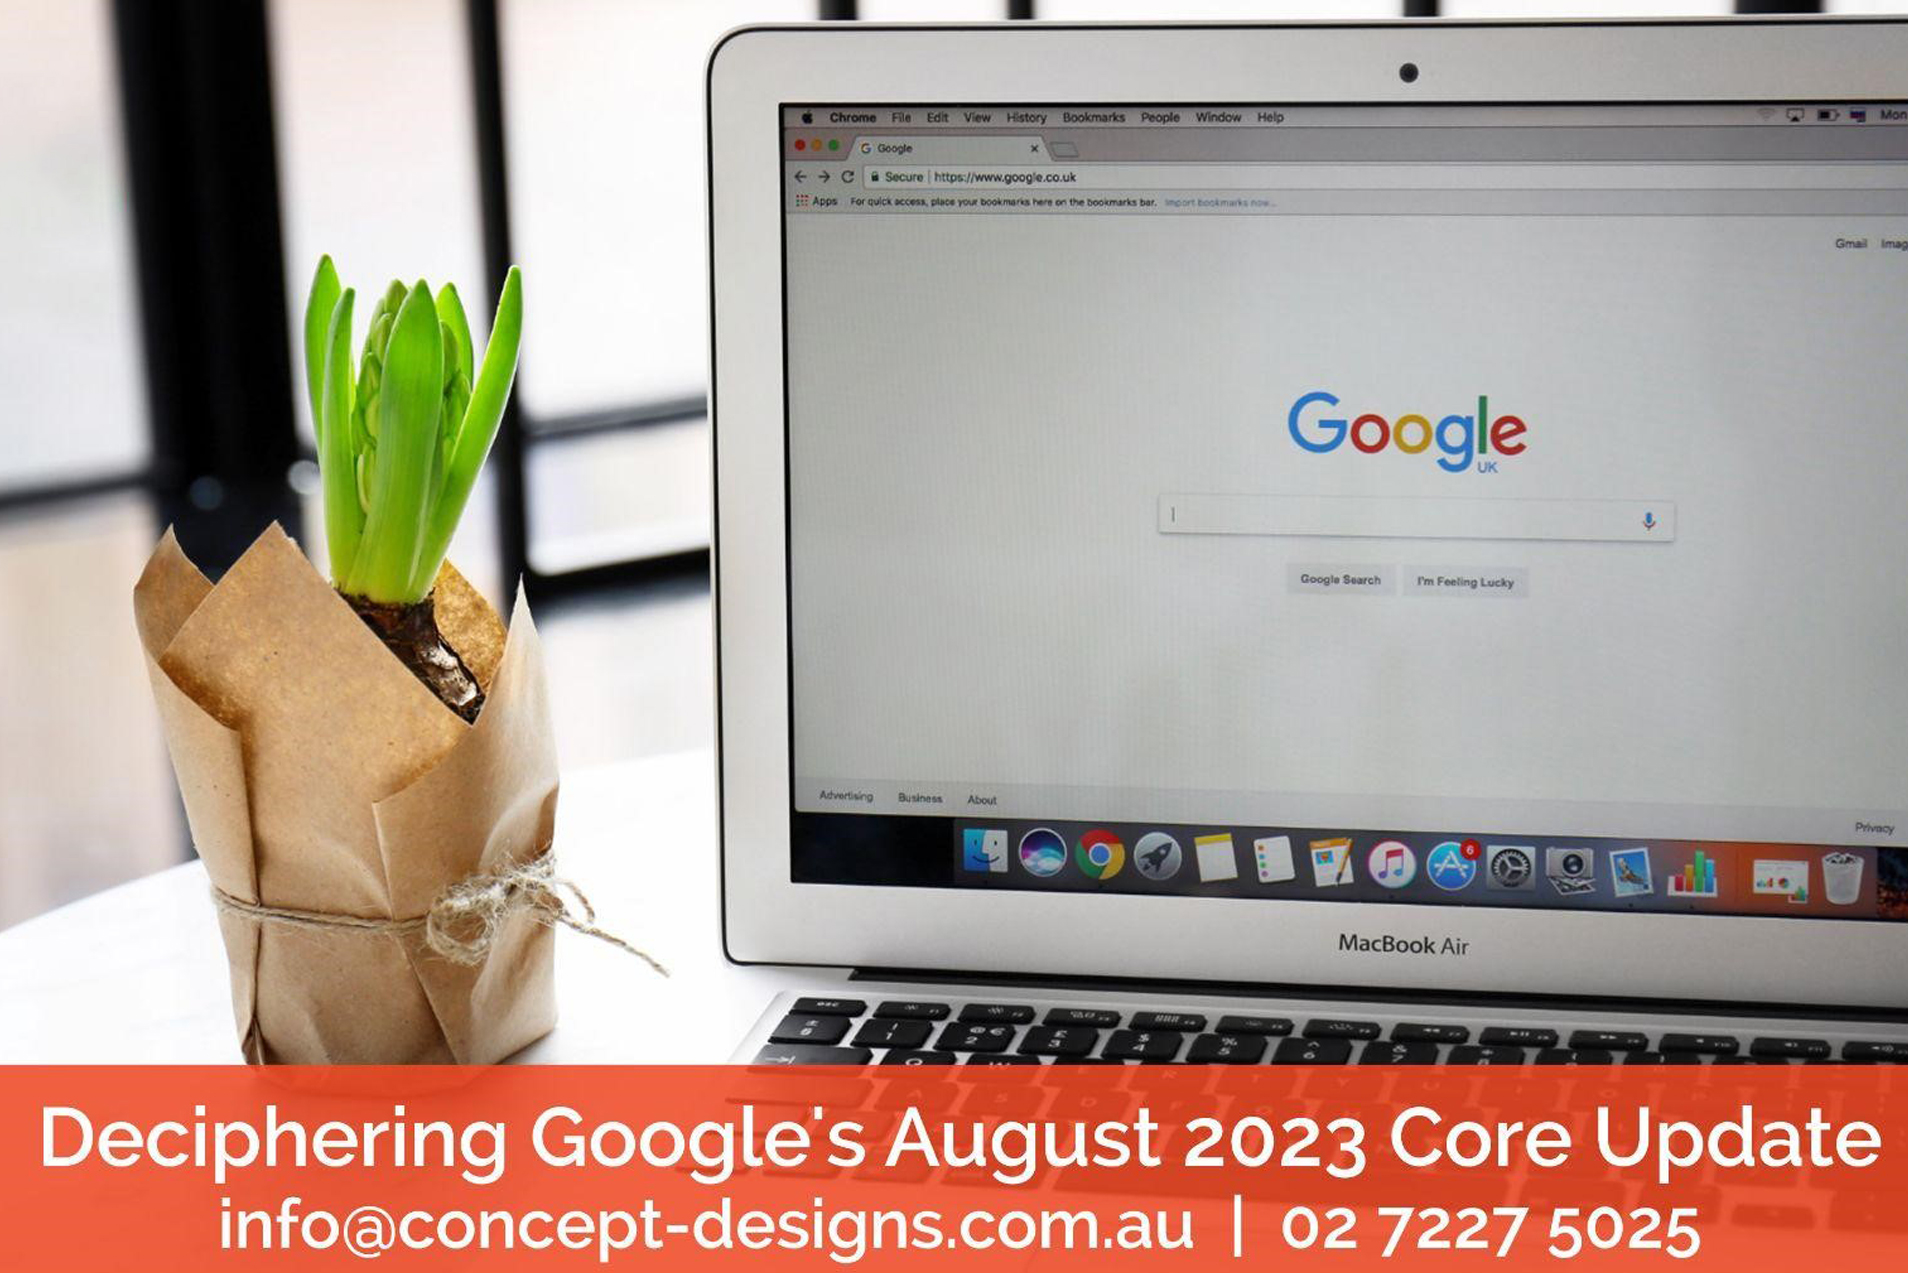 Concept Designs and Marketing Insights: Deciphering Google’s August 2023 Core Update